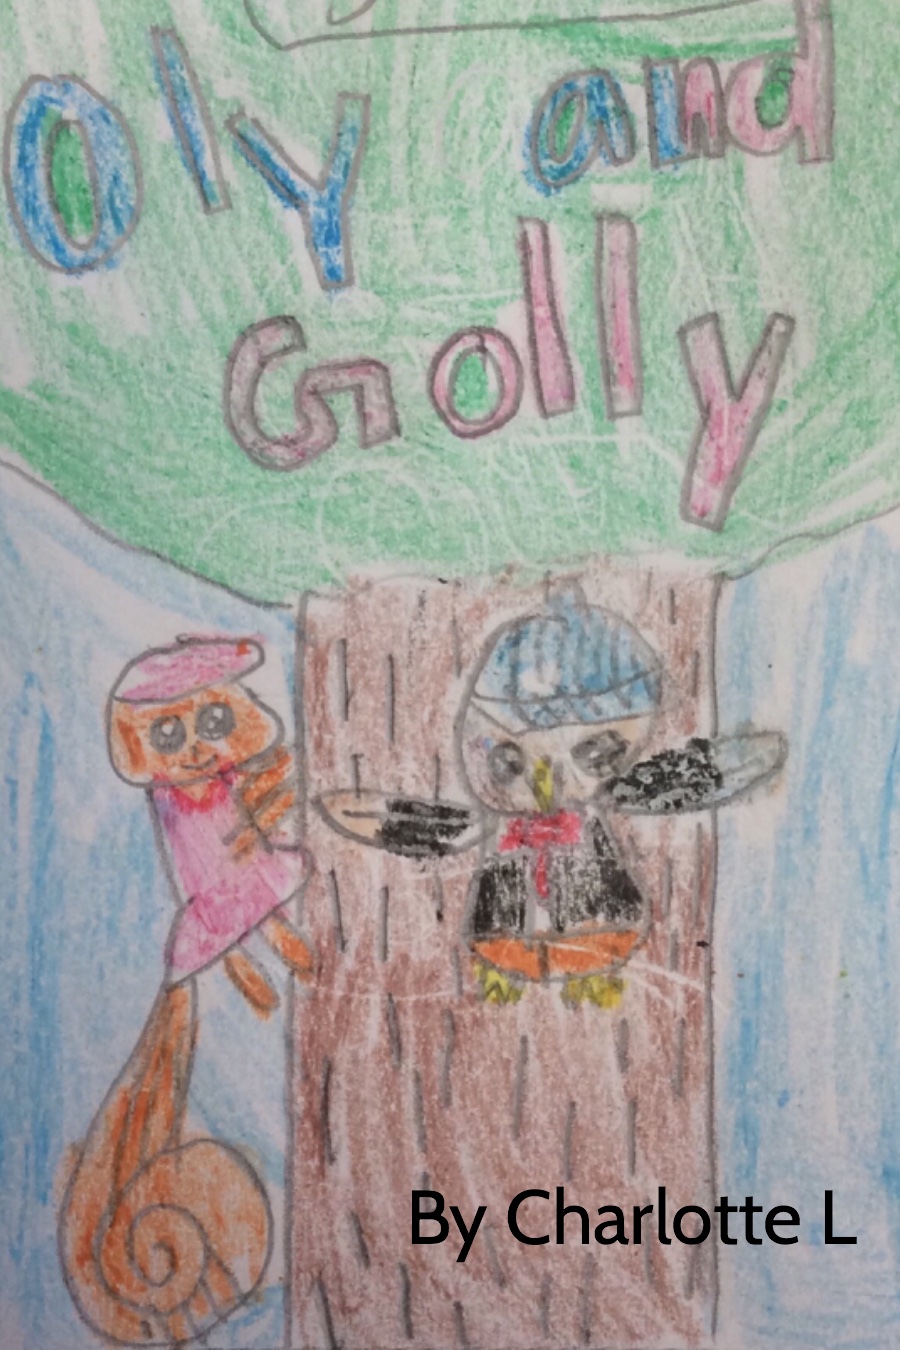 Oly and Golly by Charlotte L